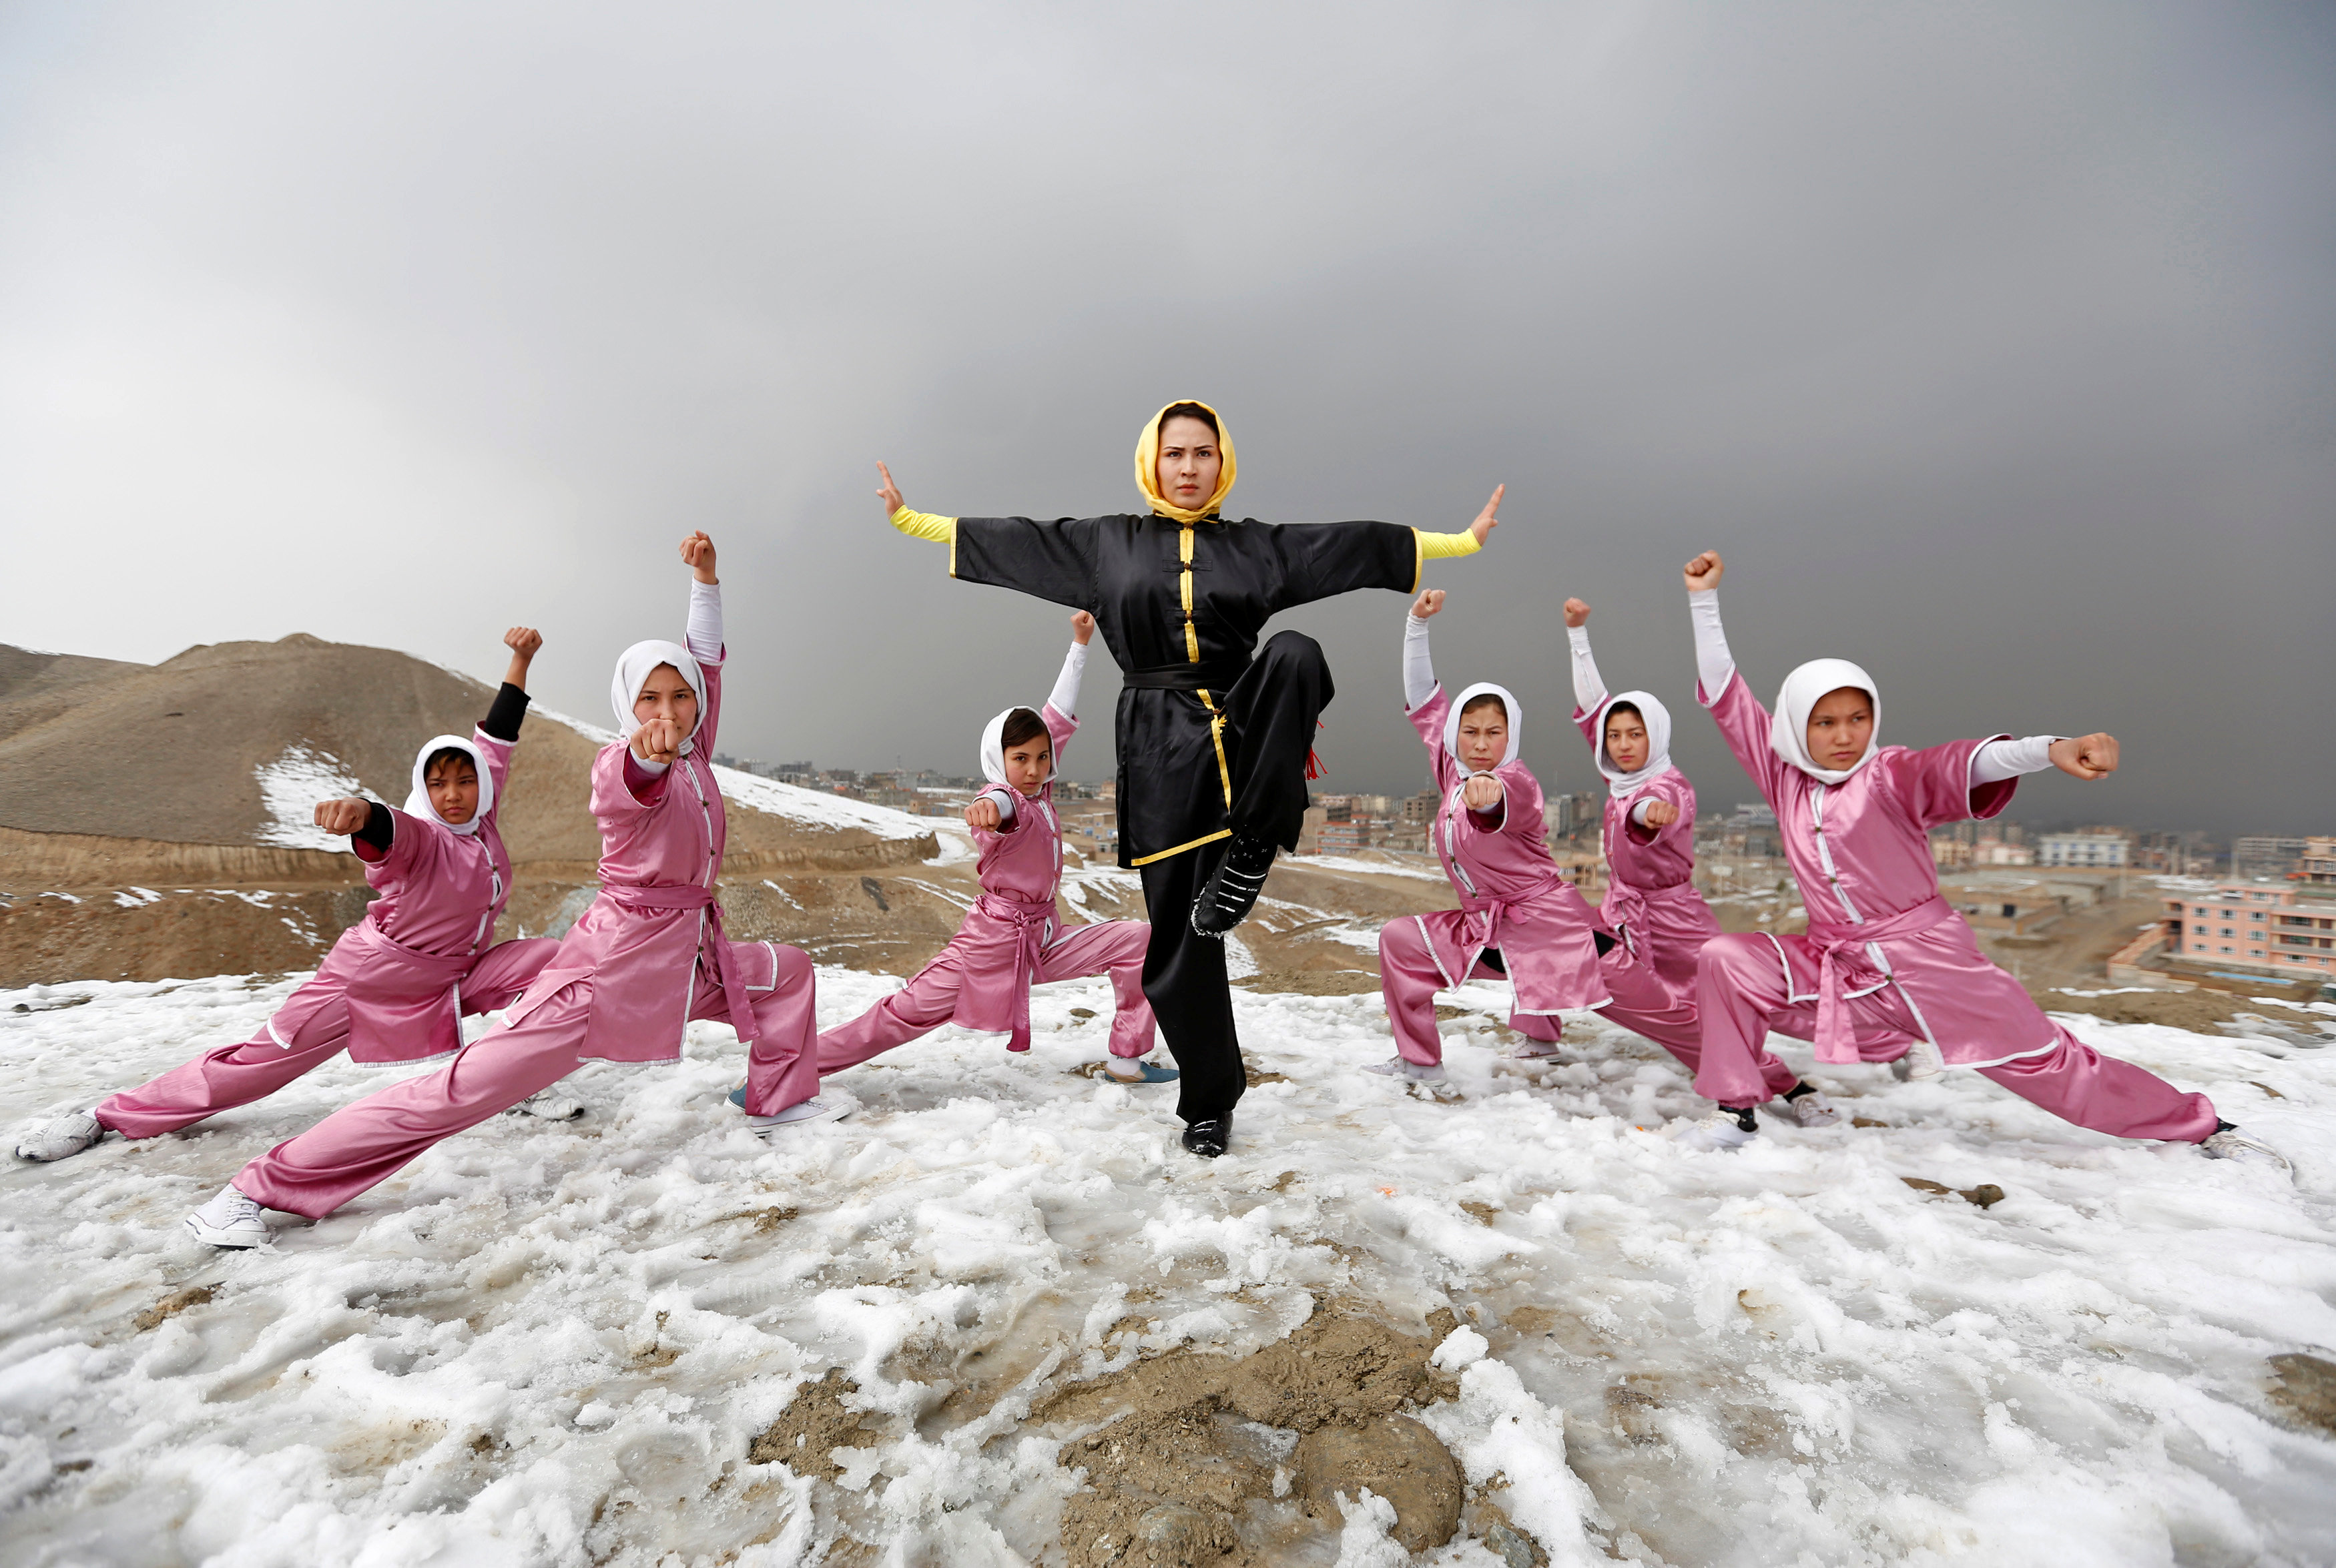 Sima Azimi (C), 20, a trainer at the Shaolin Wushu club, poses with her students after an exercise on a hilltop in Kabul, Afghanistan January 29, 2017. REUTERS/Mohammad Ismail